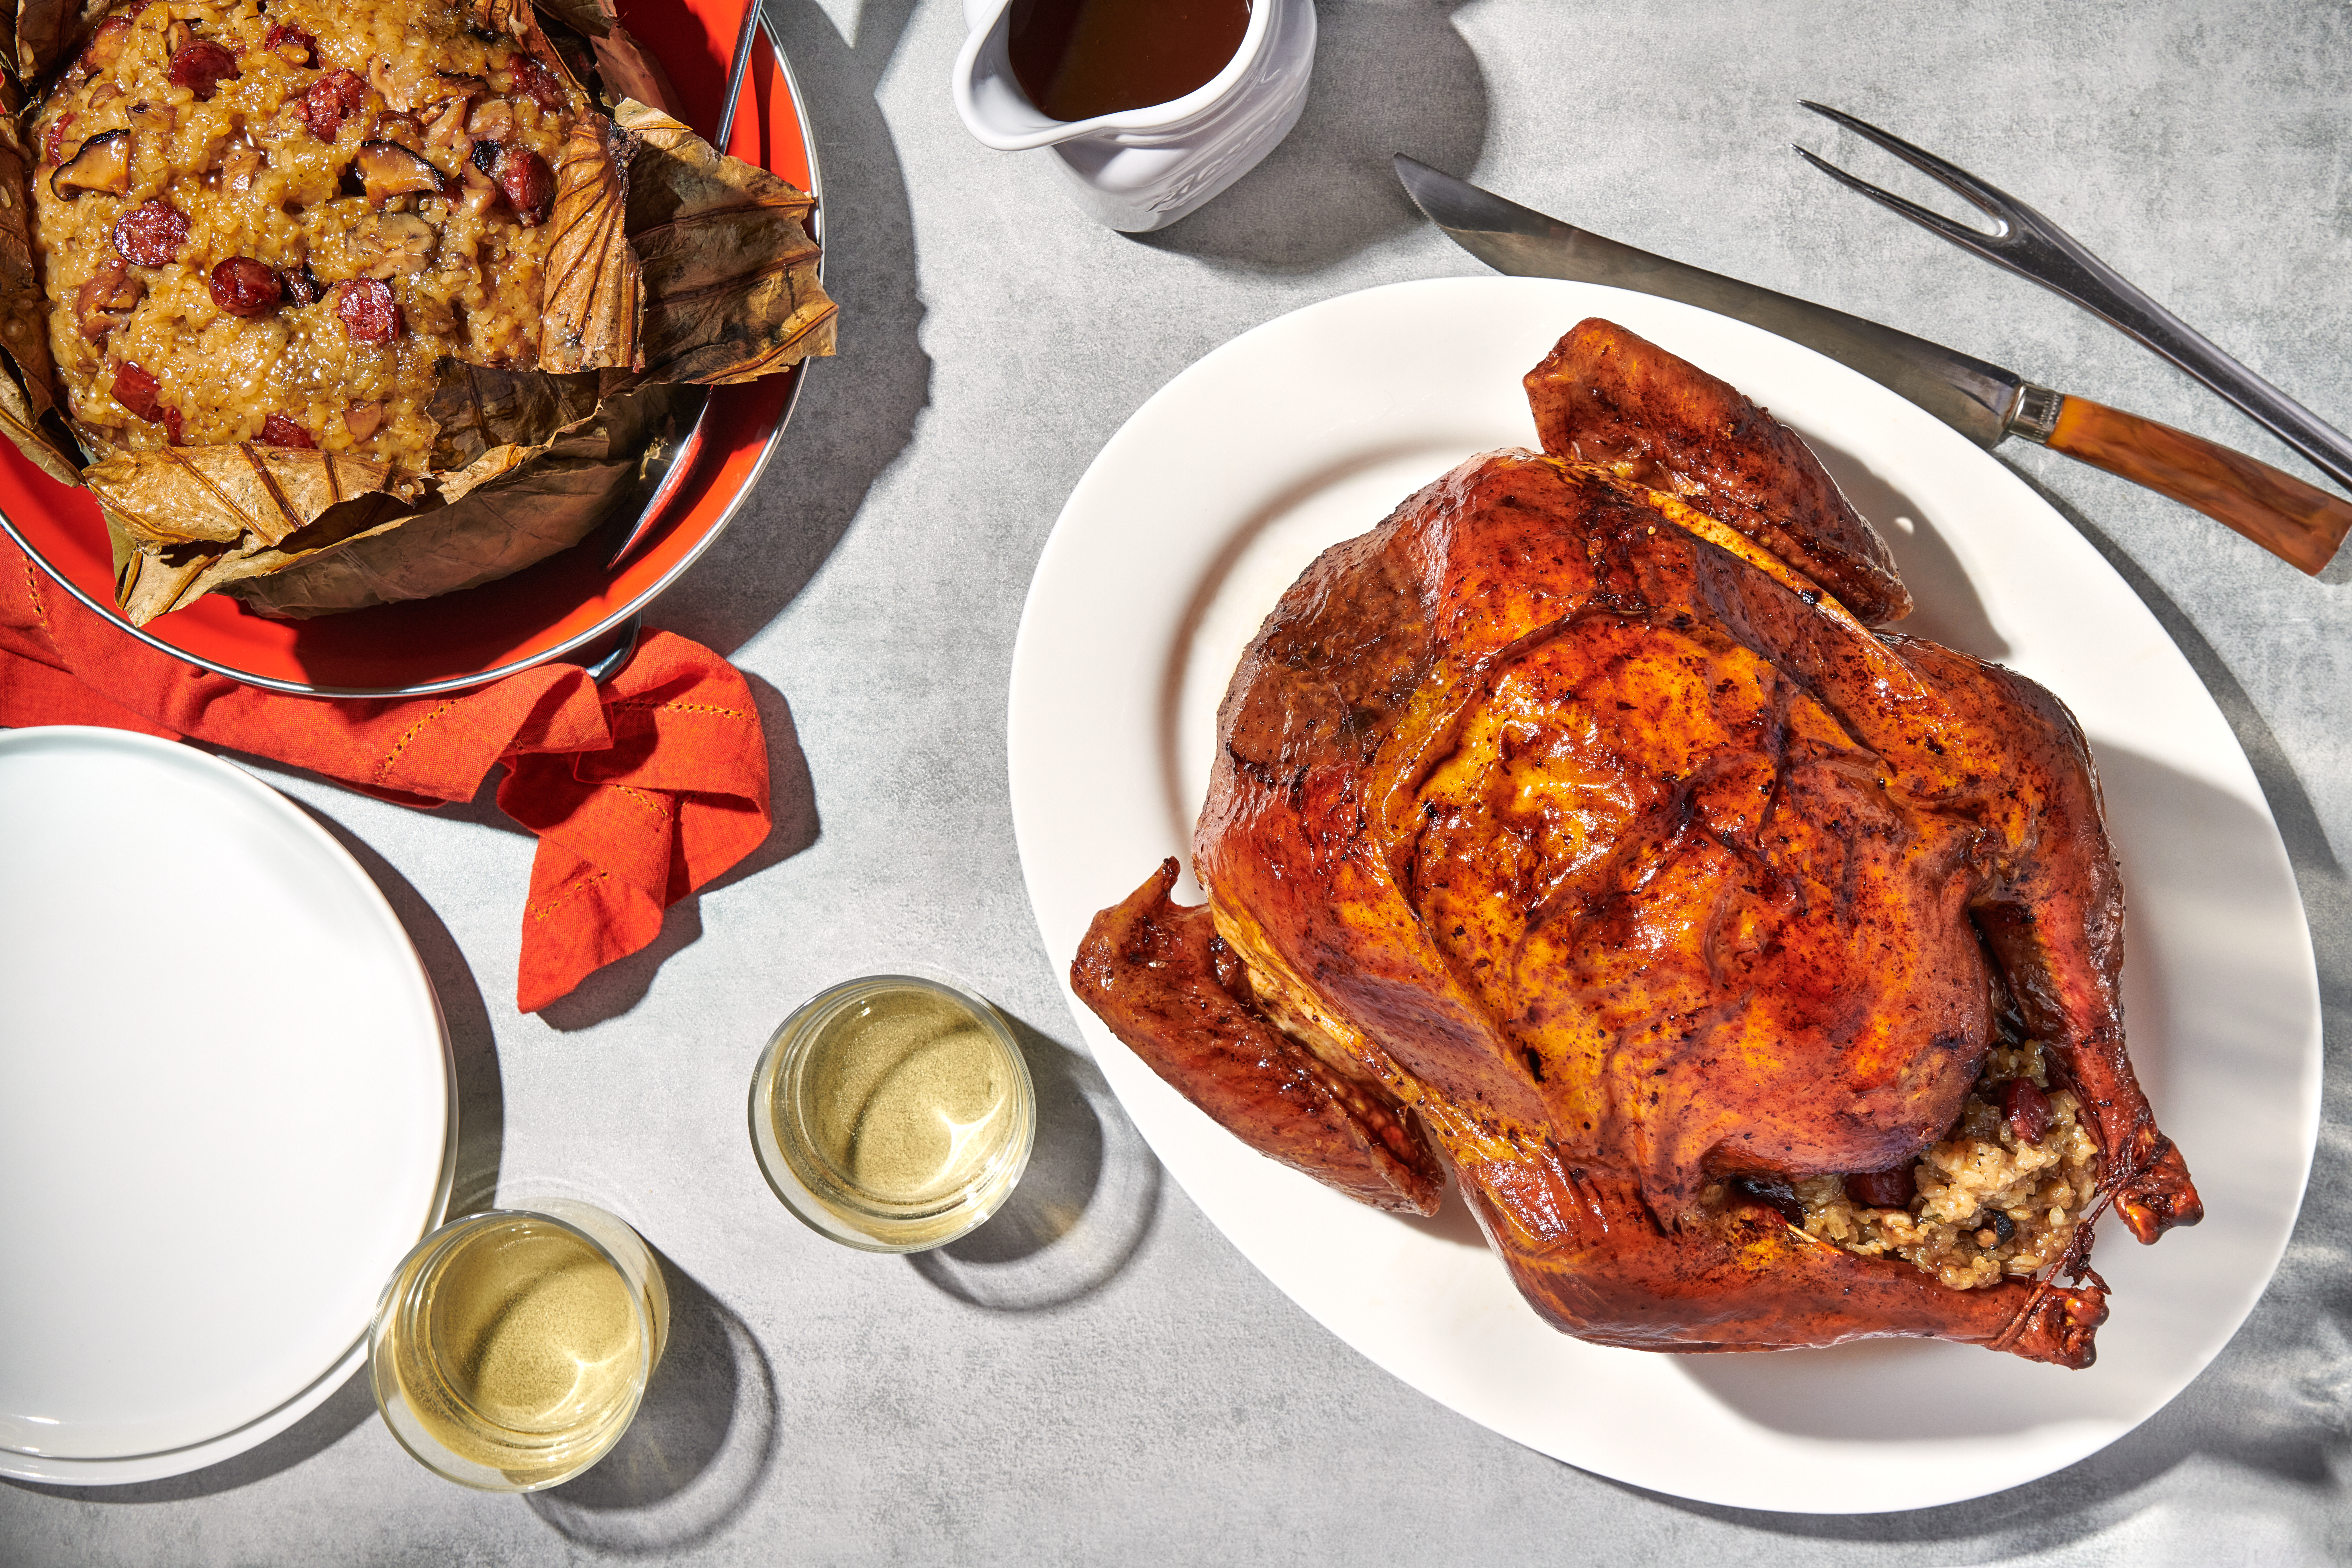 A roasted turkey sits on a white platter next to a big bowl full of sticky rice stuffing. Next to them are two glasses of white wine and serving utensils.